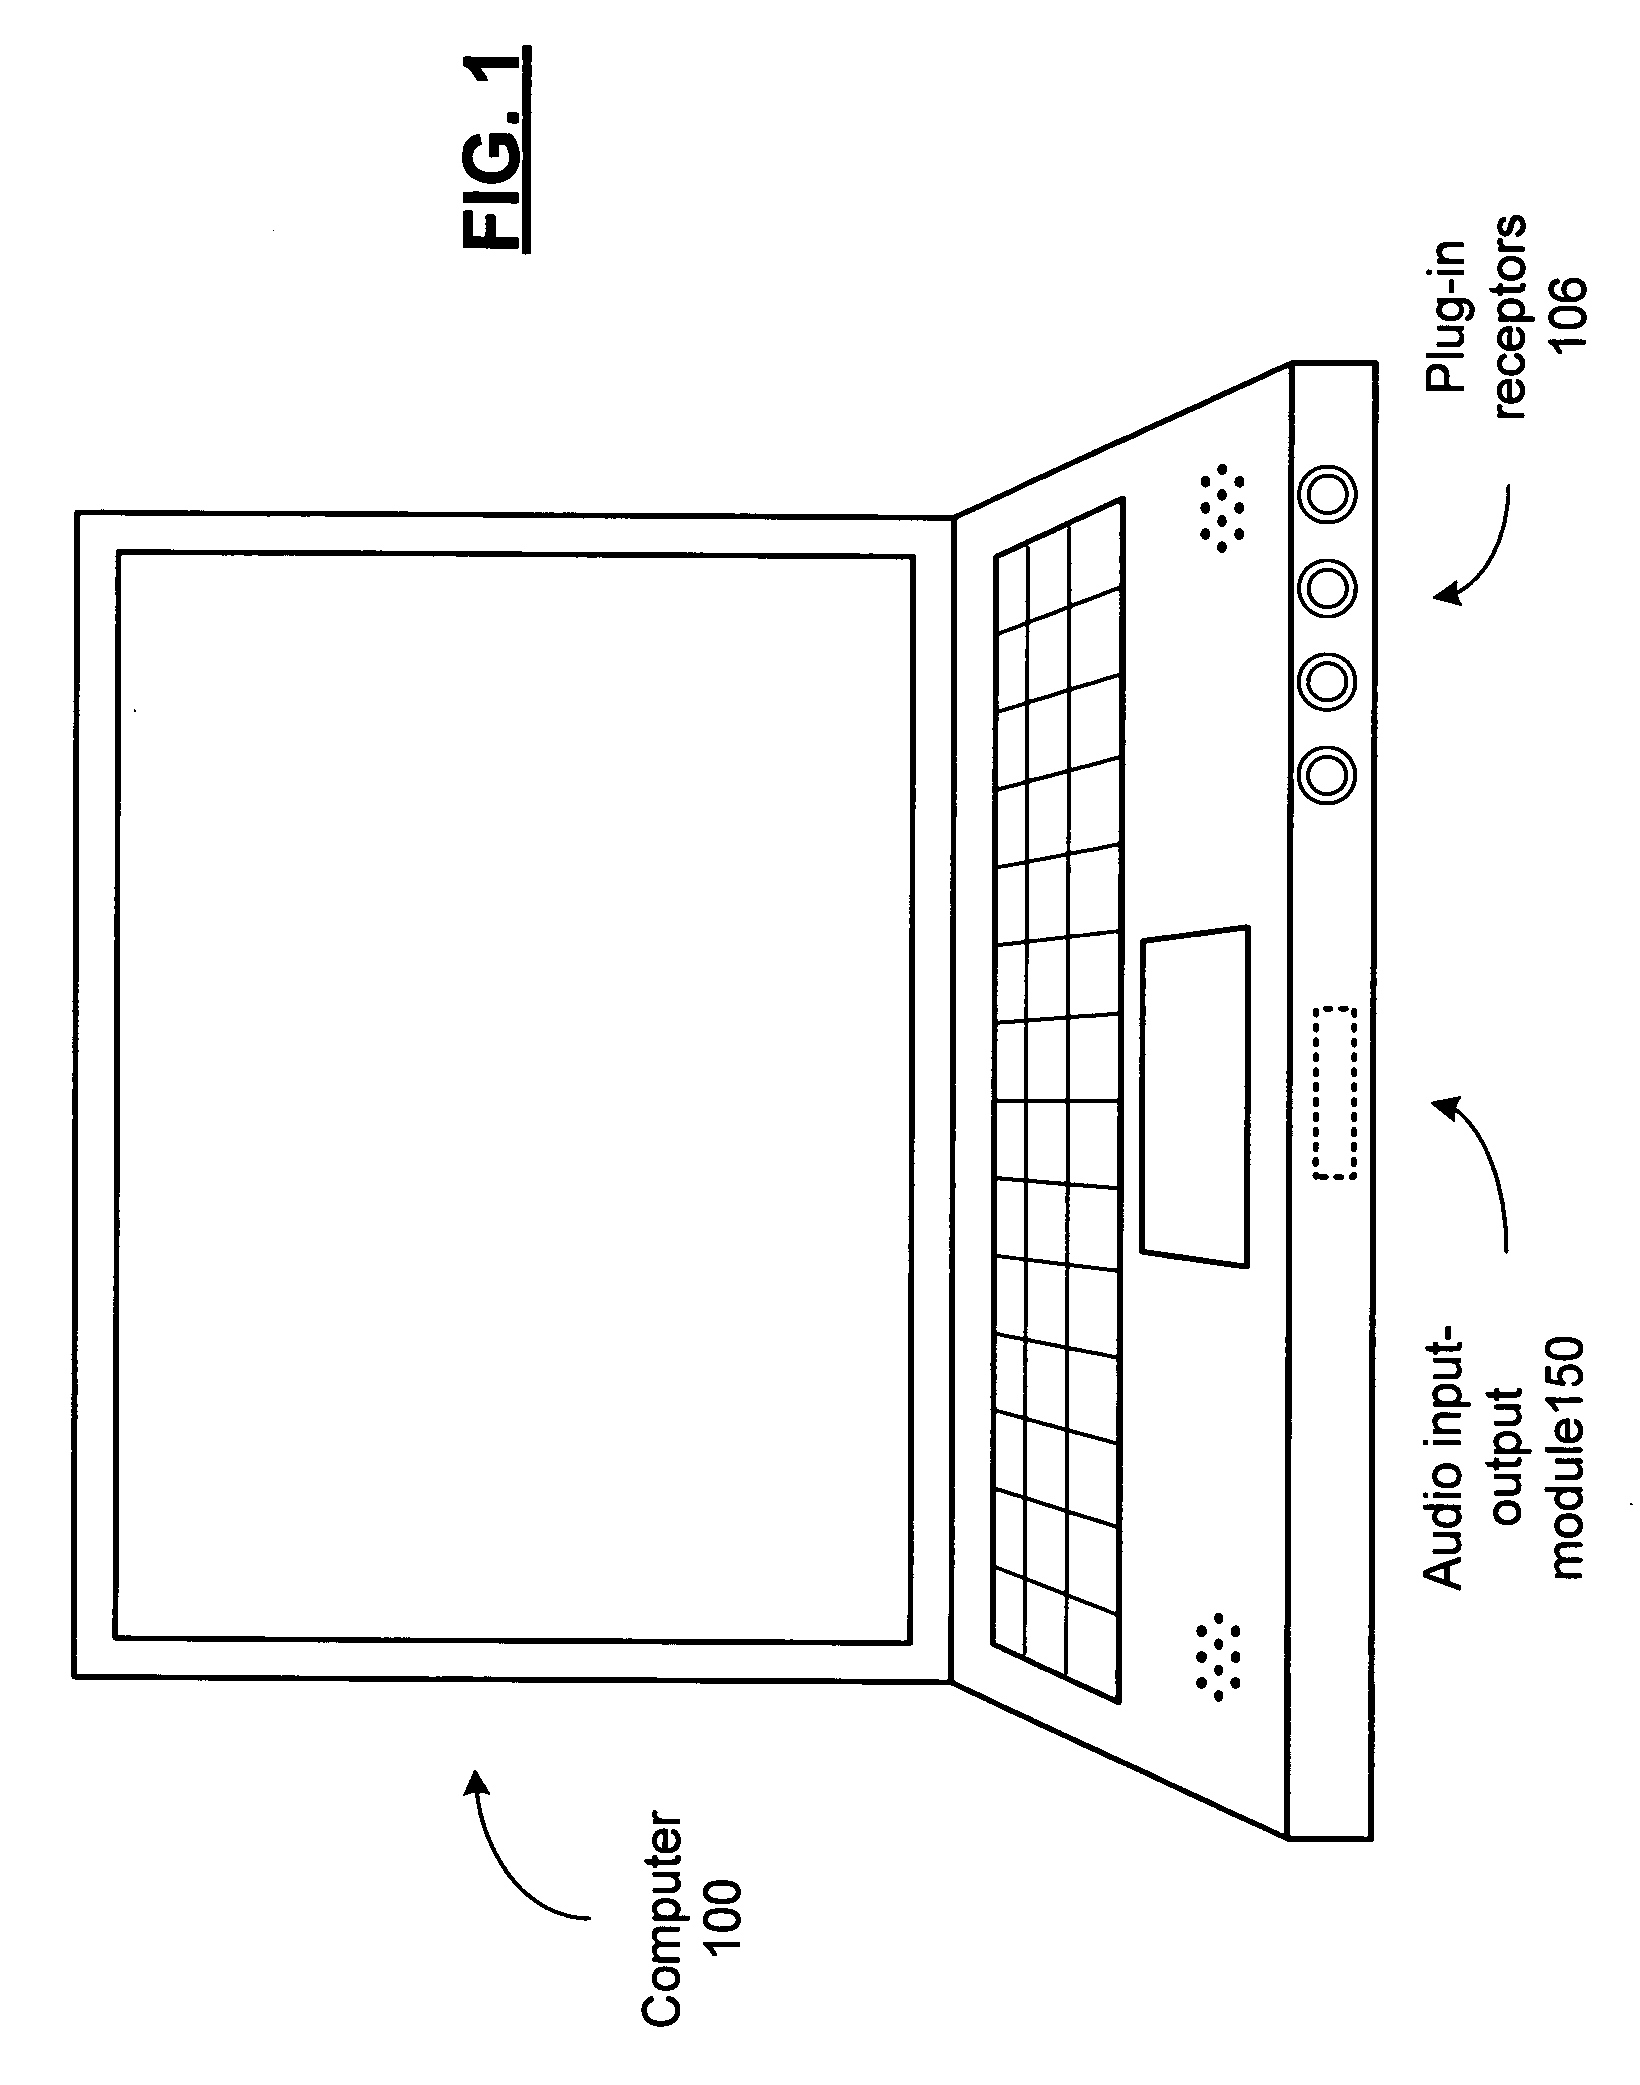 Audio input-output module, plug-in detection module and methods for use therewith